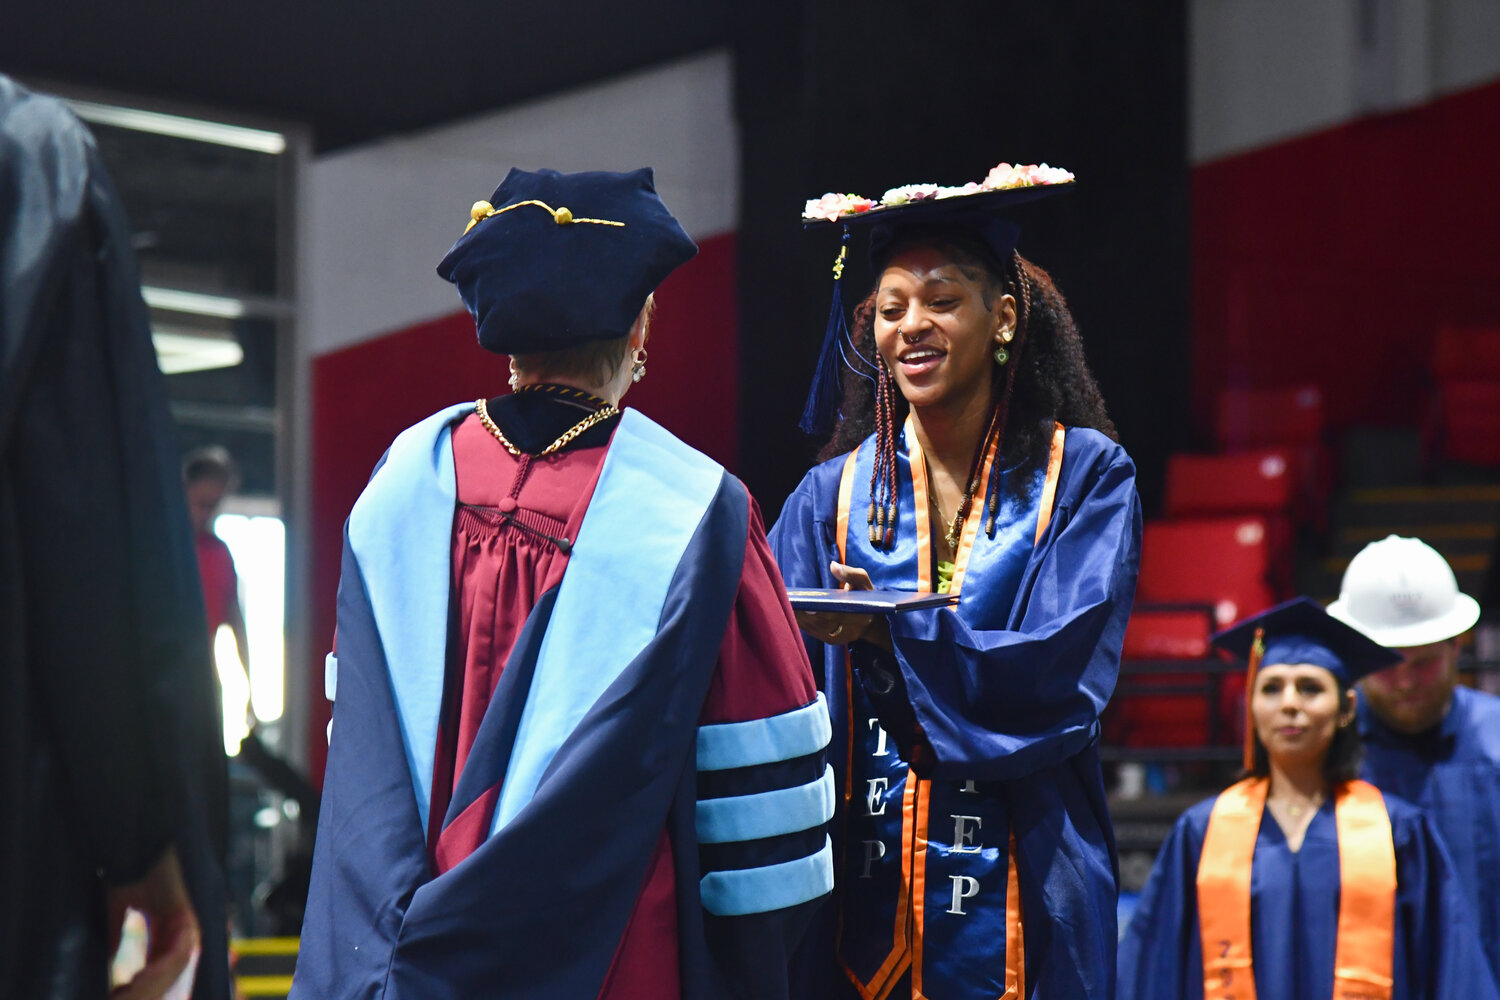 Brichee Carmon was one of the 425 undergraduate students from Utica University who was able to walk across the stage at the Adirondack Bank Center at the Utica Memorial Auditorium on Thursday, as the university's 74th undergraduate commencement took place.